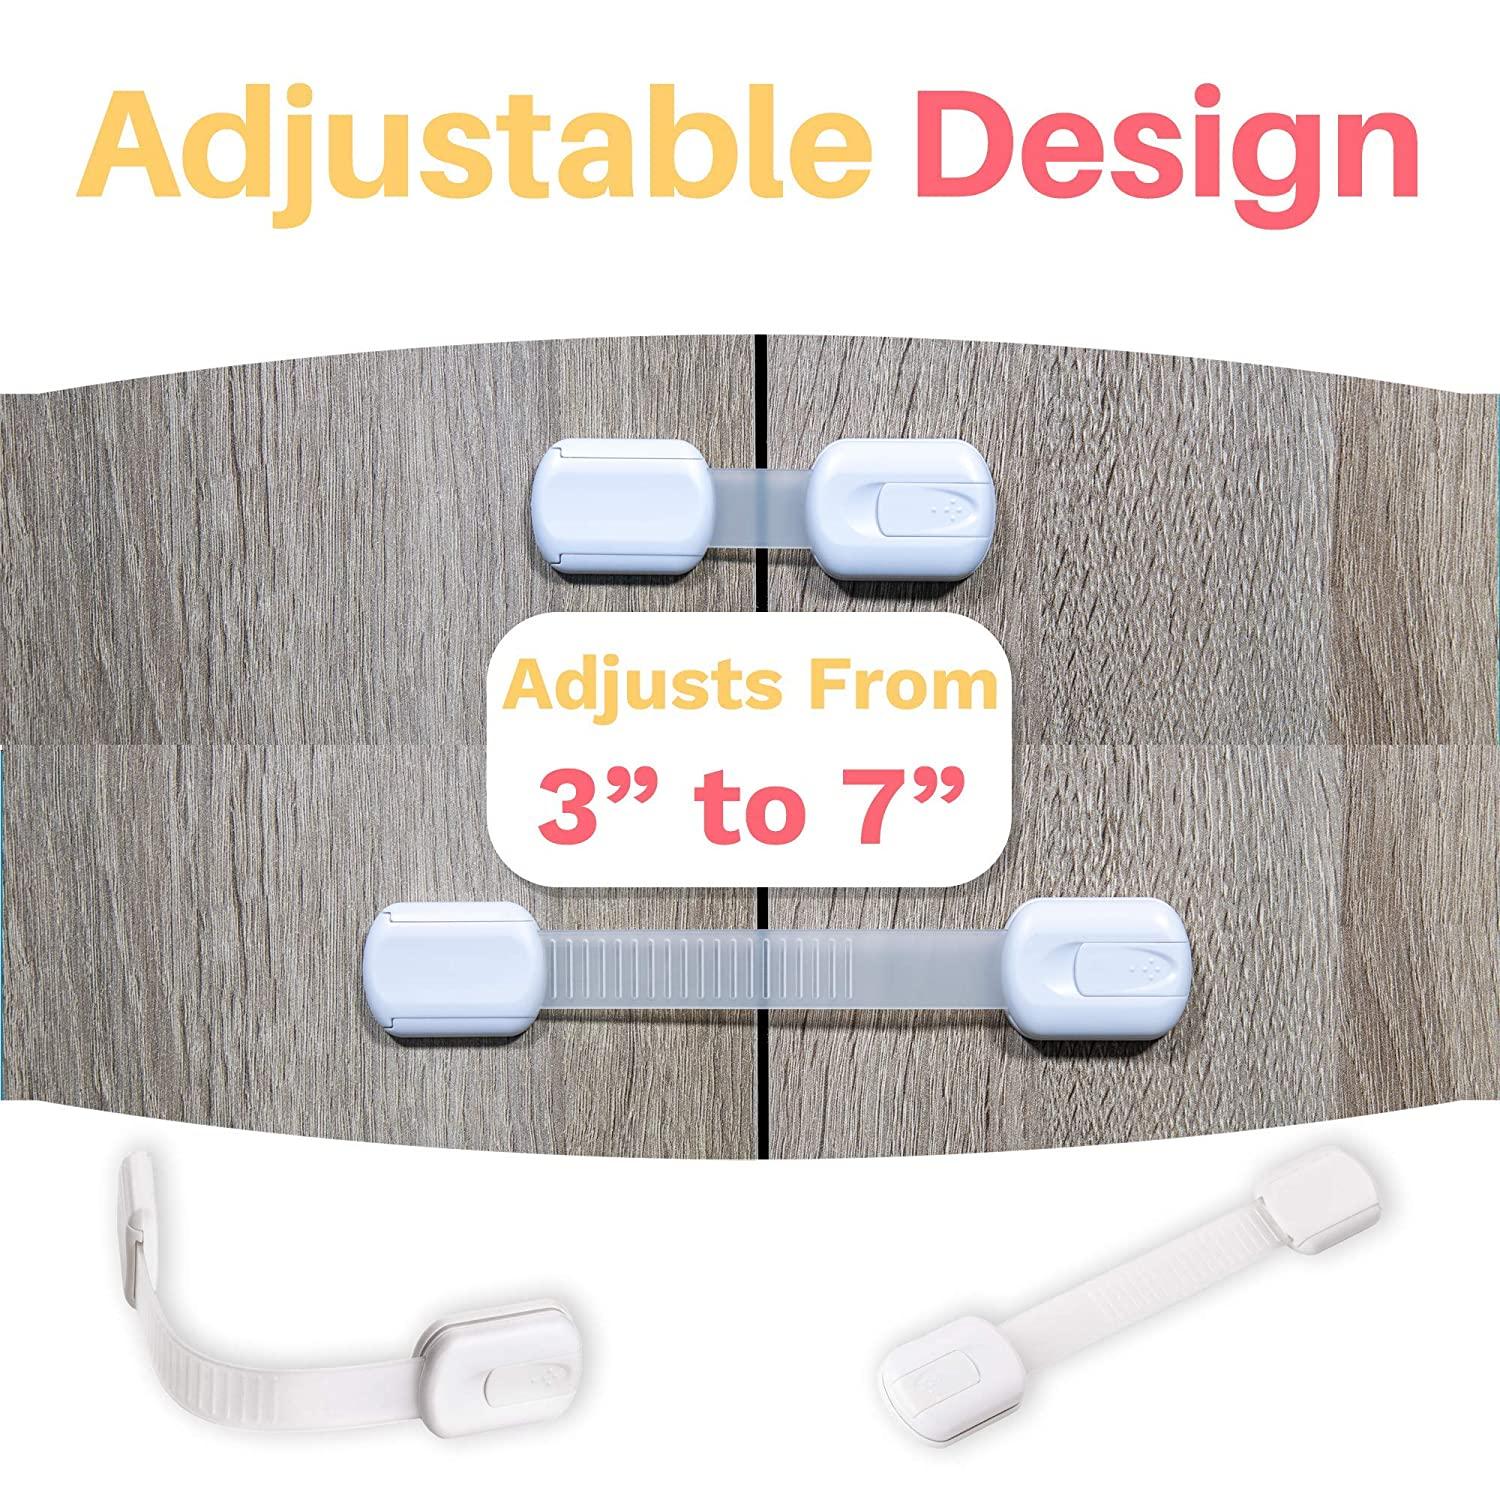 Cabinet Locks Child Safety Latches - Baby Proofing Cabinets & Drawers Locks  - Child Proof Your Home - No Drilling & No Tools Required! (8 Pack) 8 Count  (Pack of 1)